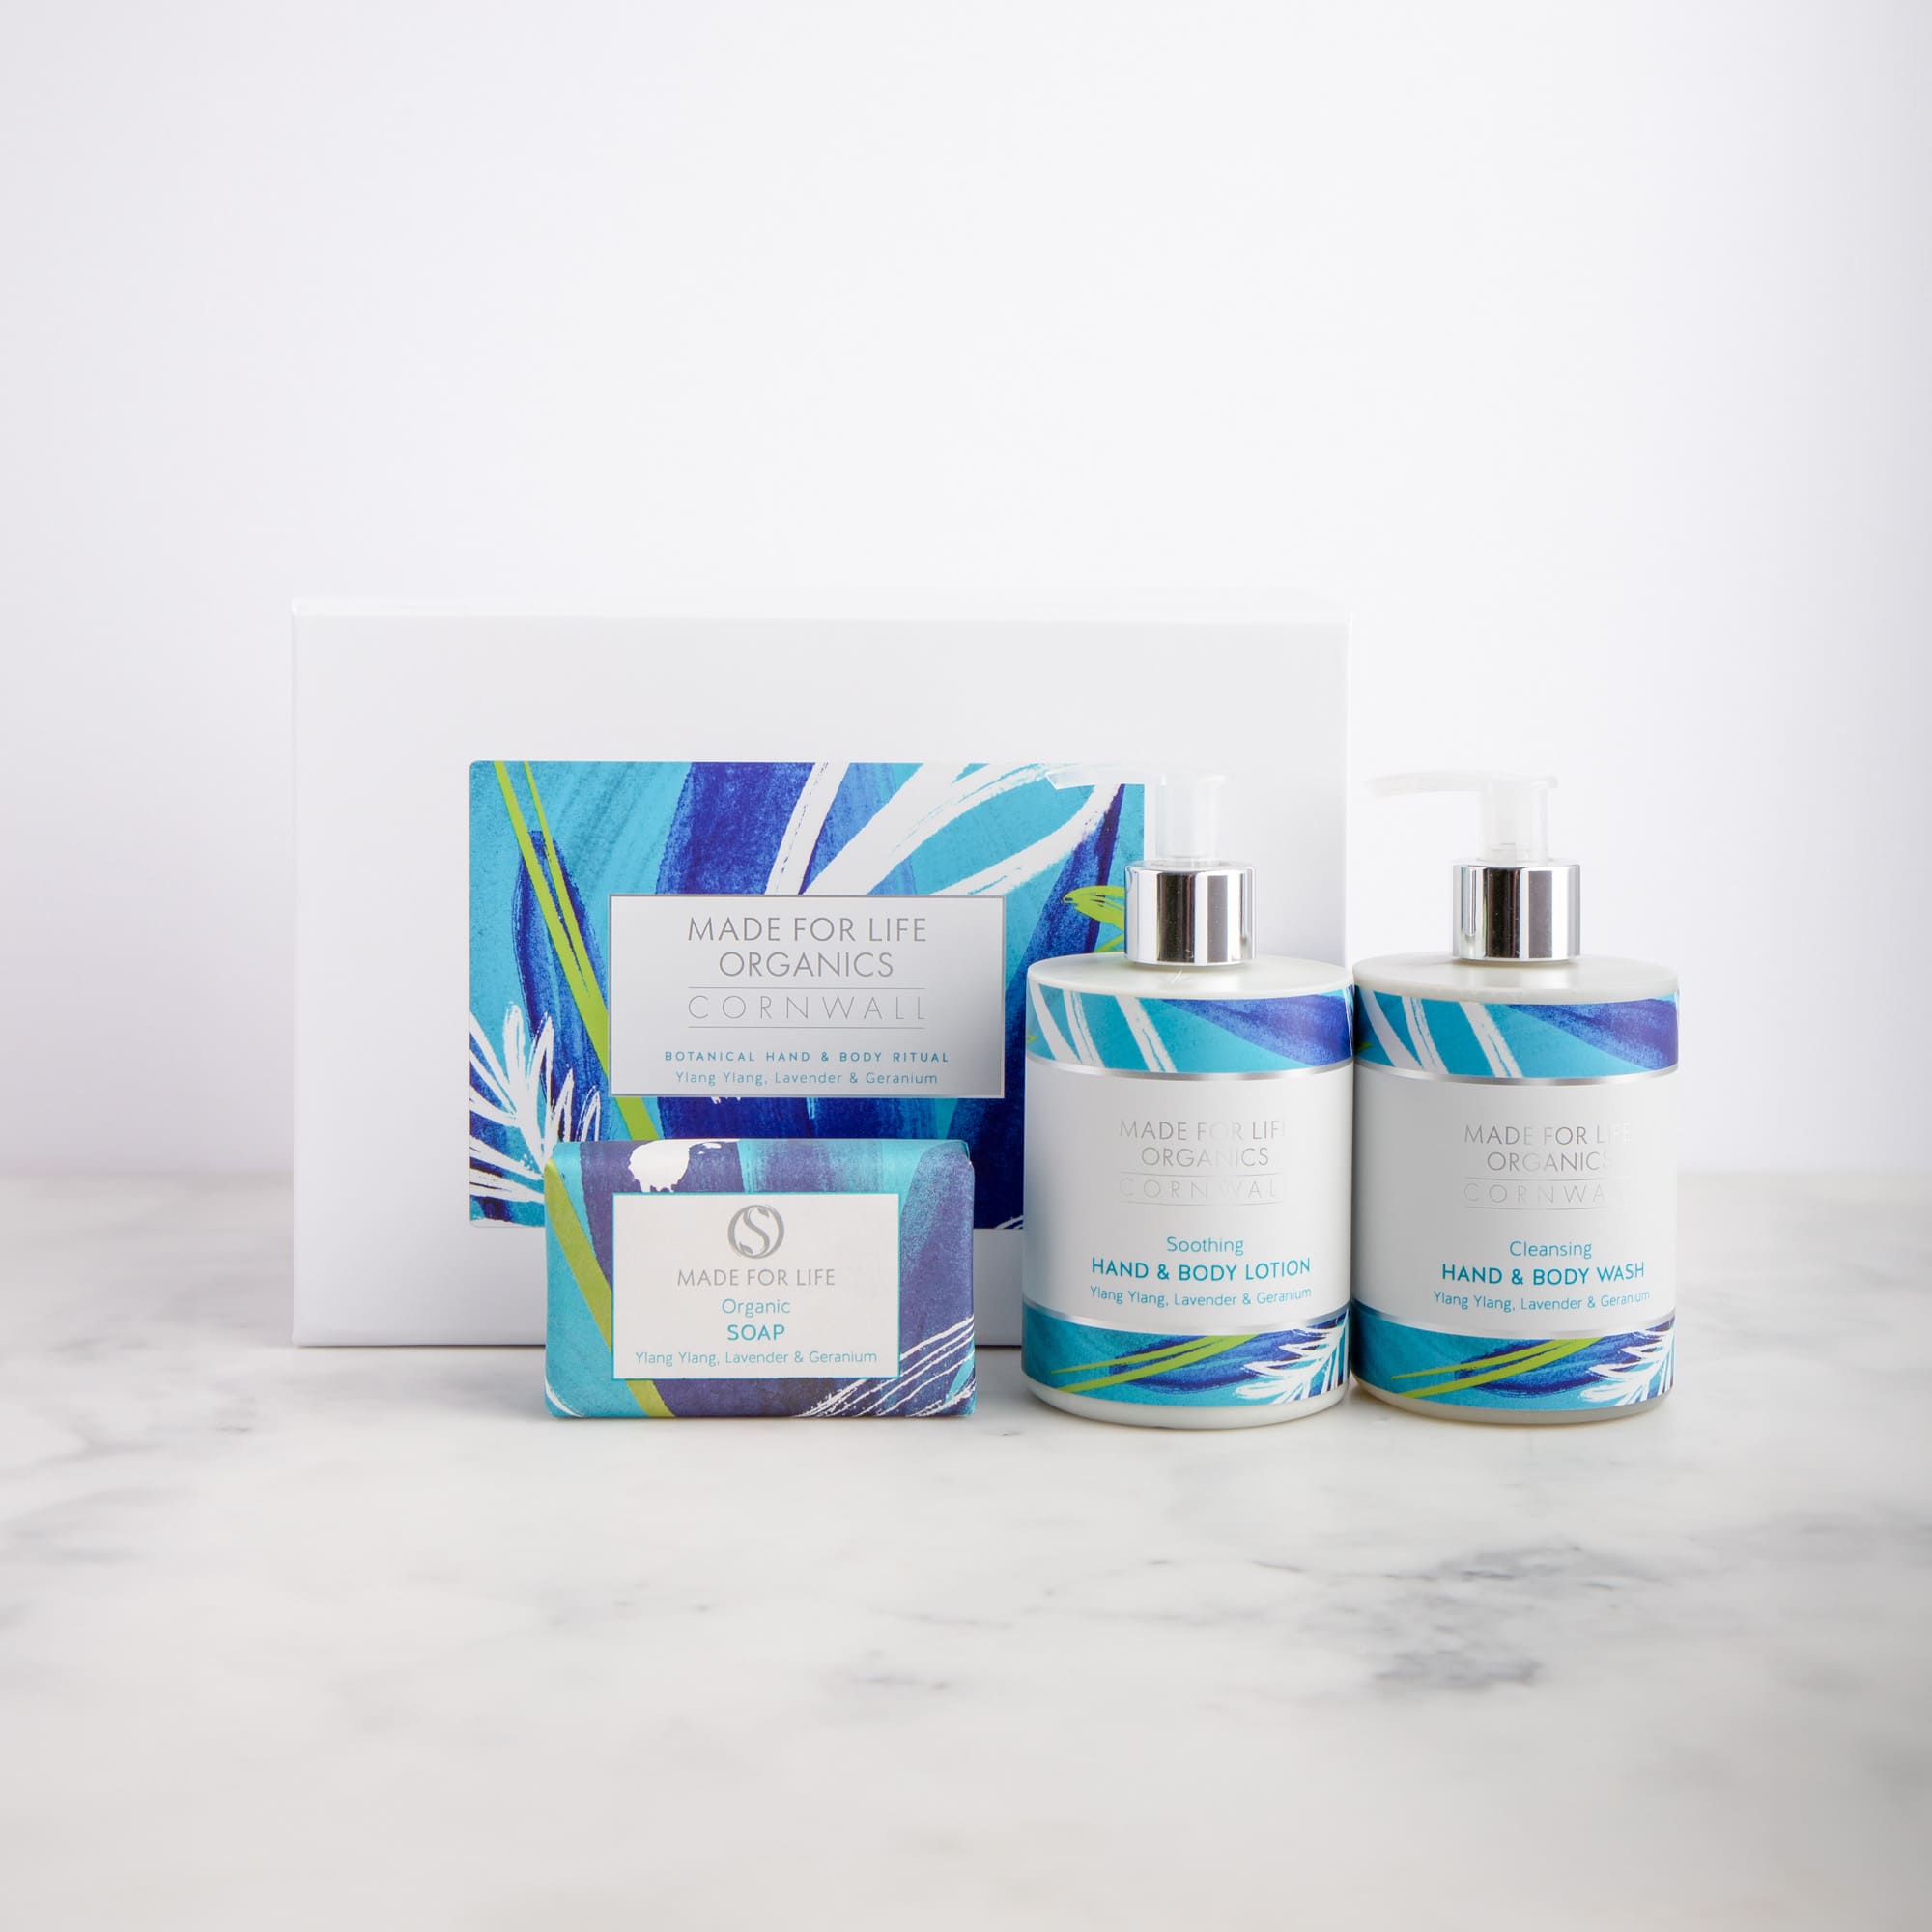 The Rejuvenating Rituals Collection